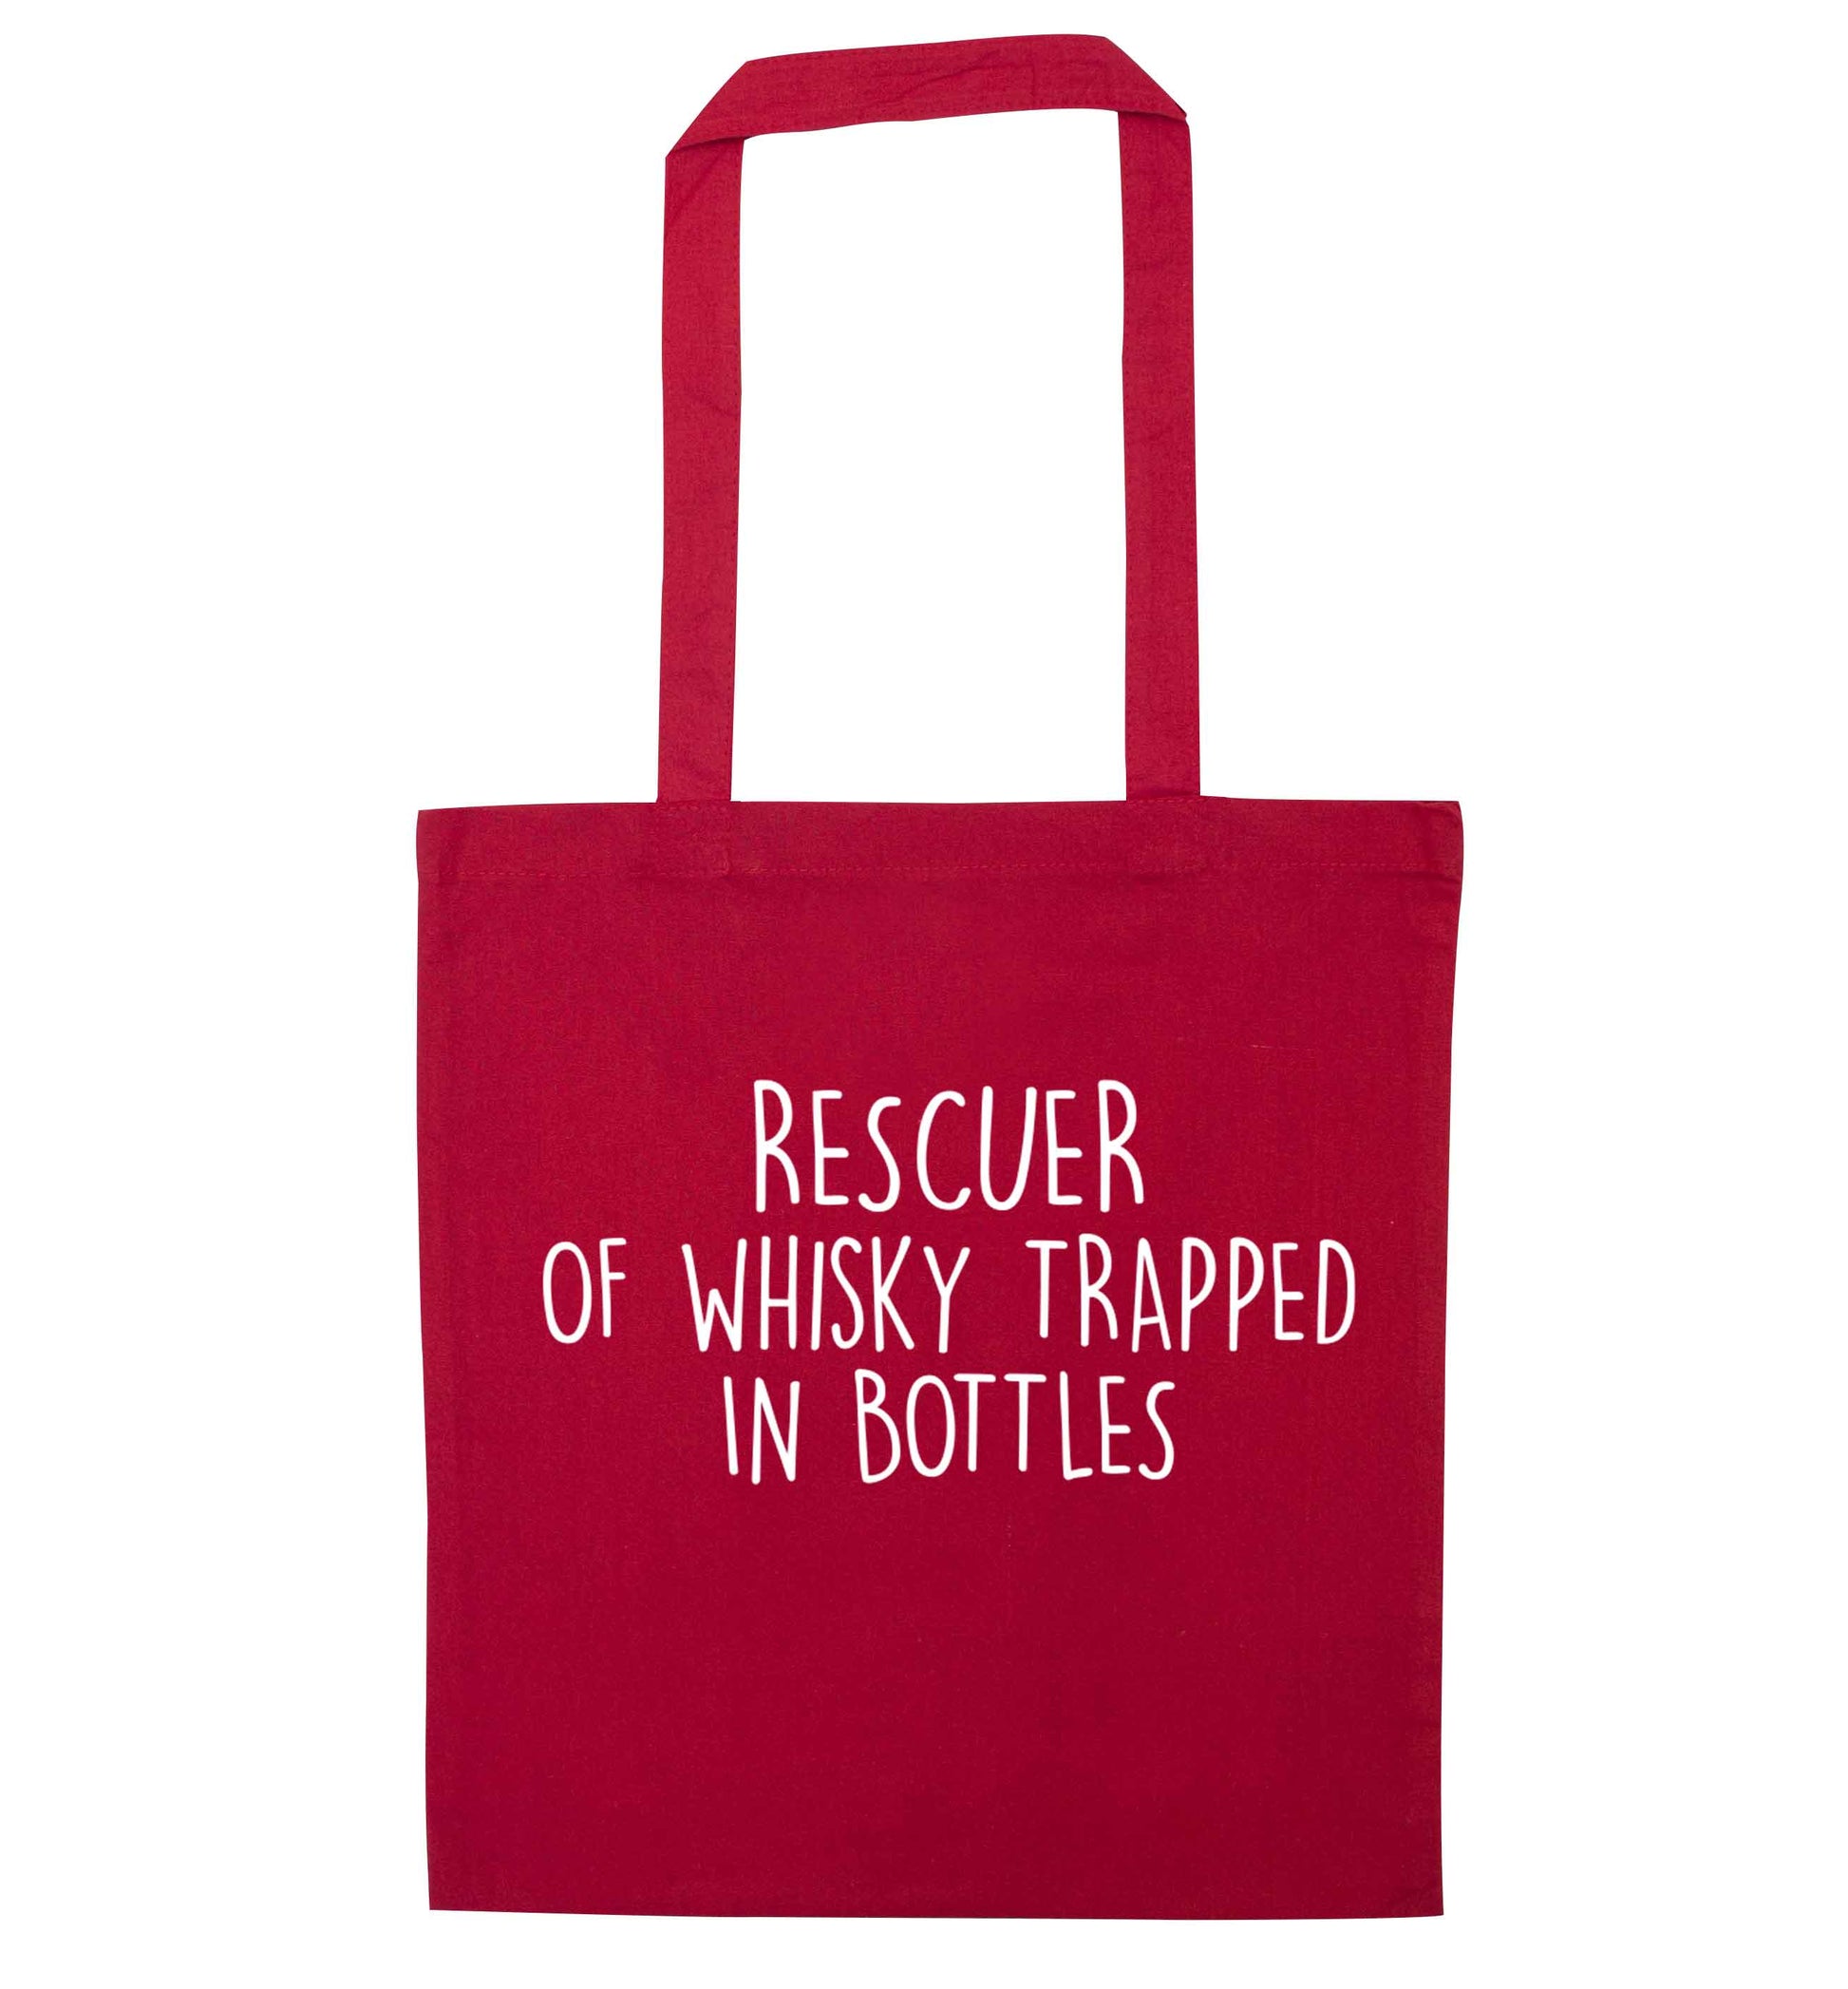 Rescuer of whisky trapped in bottles red tote bag